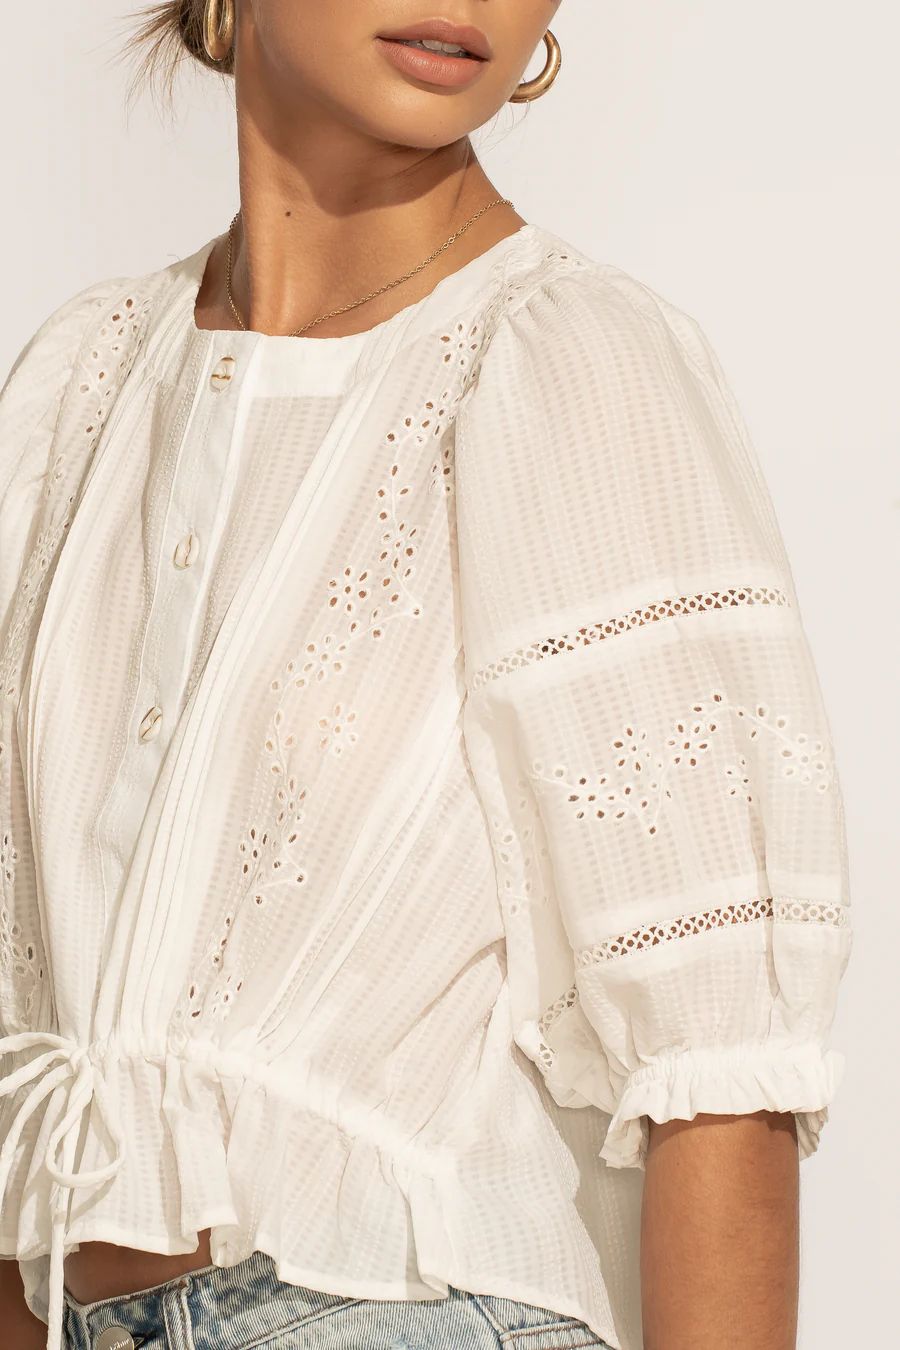 Becca Embroidered Blouse in White - böhme | Bohme